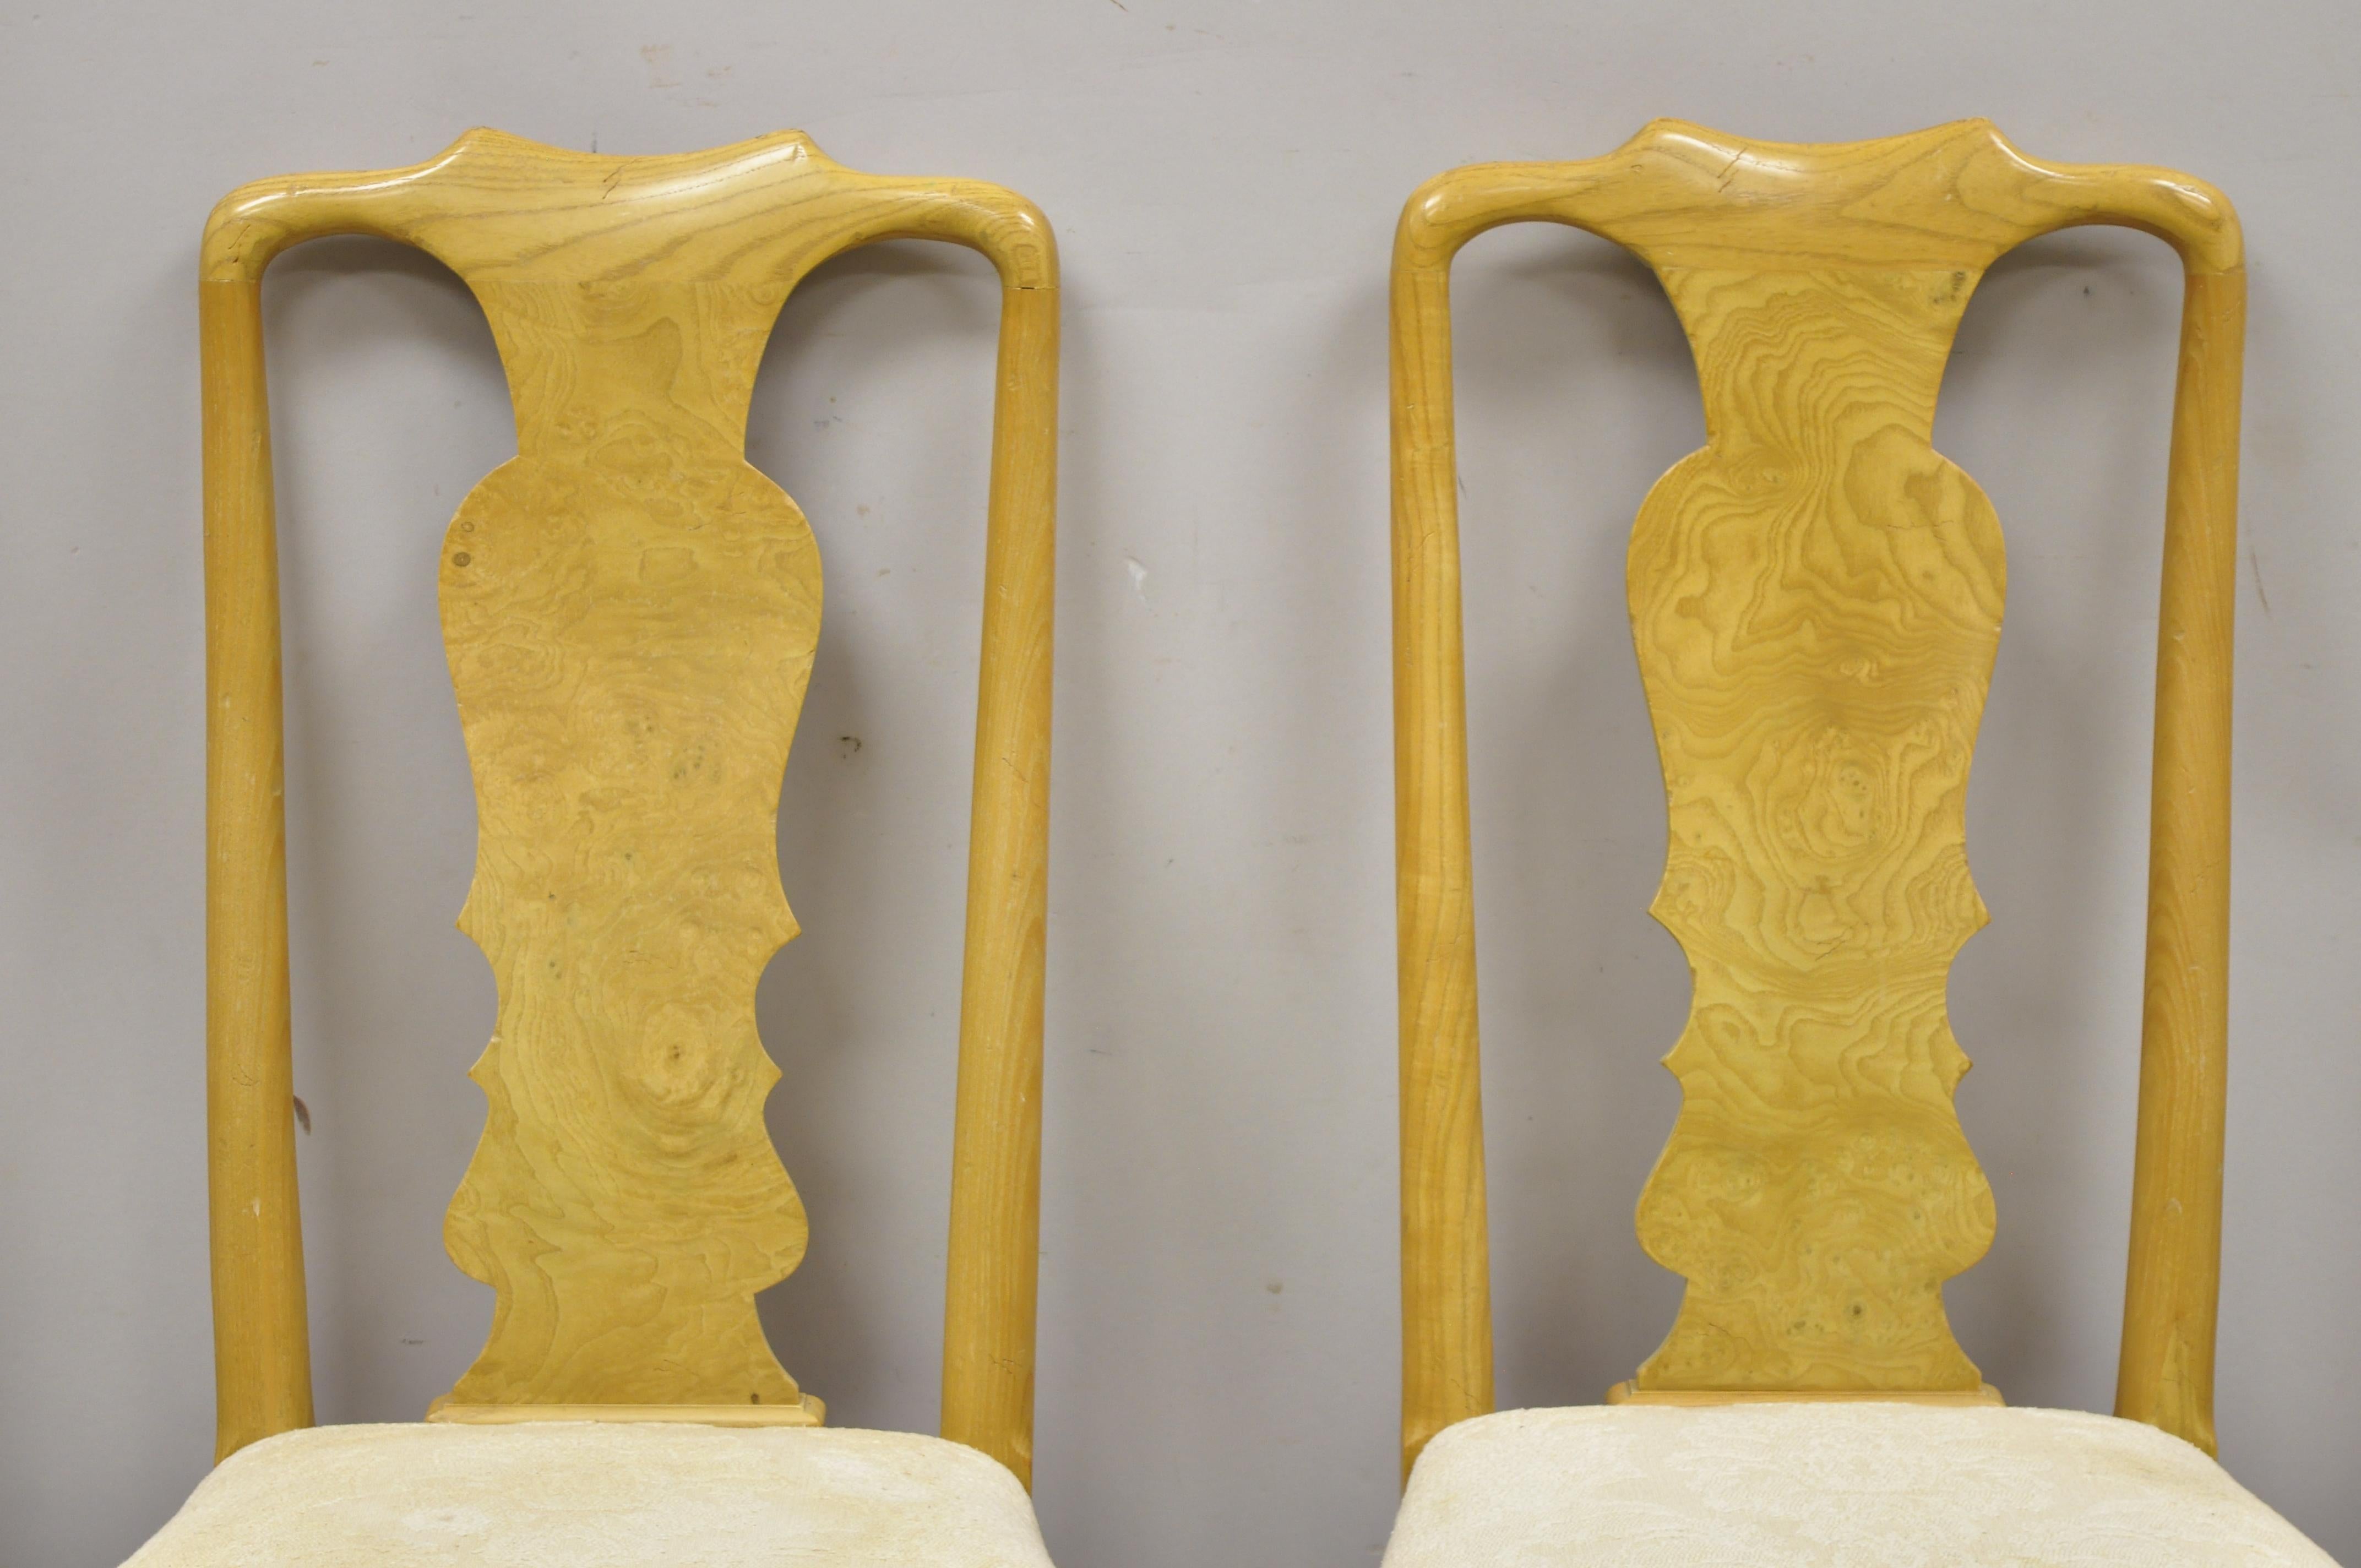 North American Vintage Henredon Yellow Burl Wood Queen Anne Dining Chairs, Set of 4